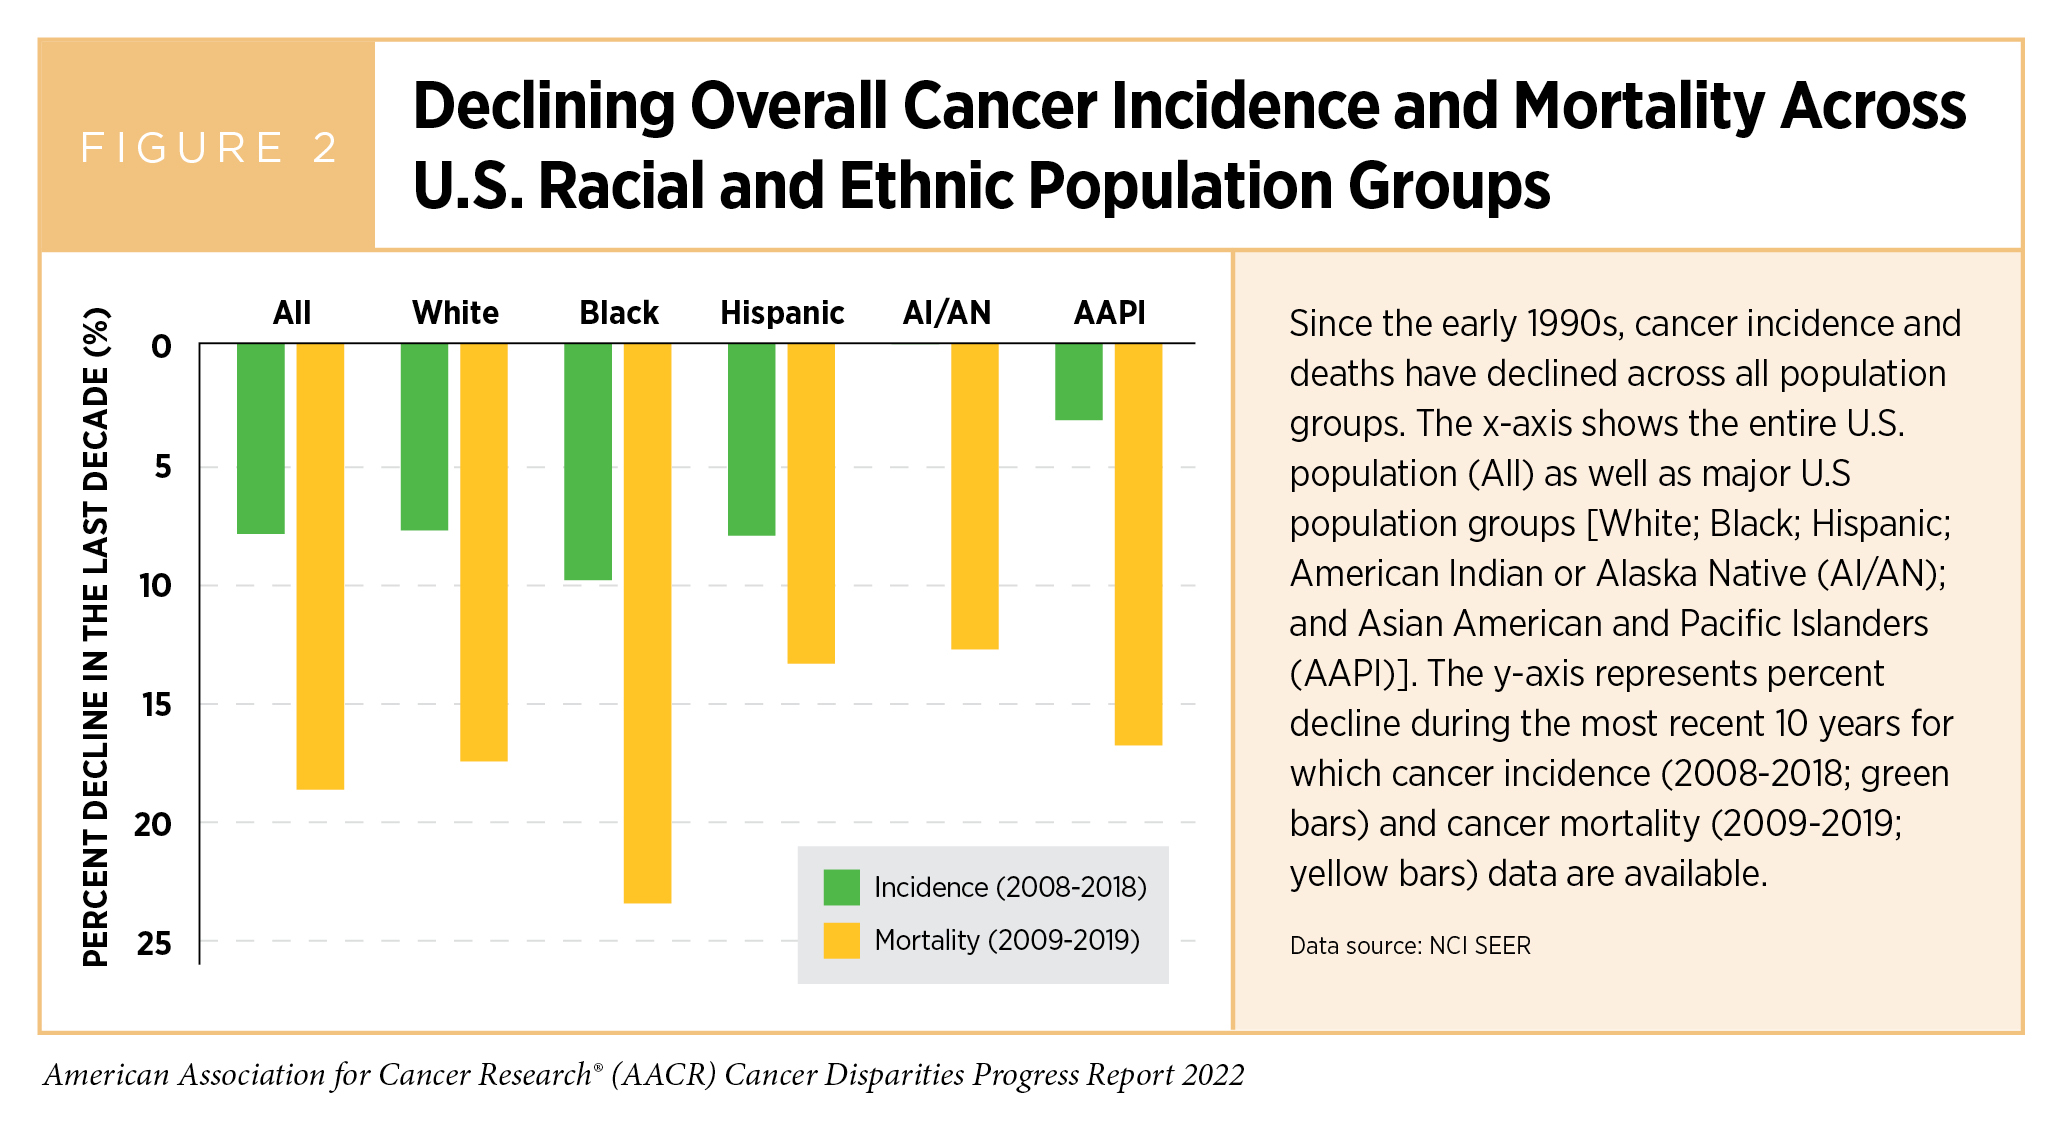 Breast Cancer Risk: Race and Ethnicity